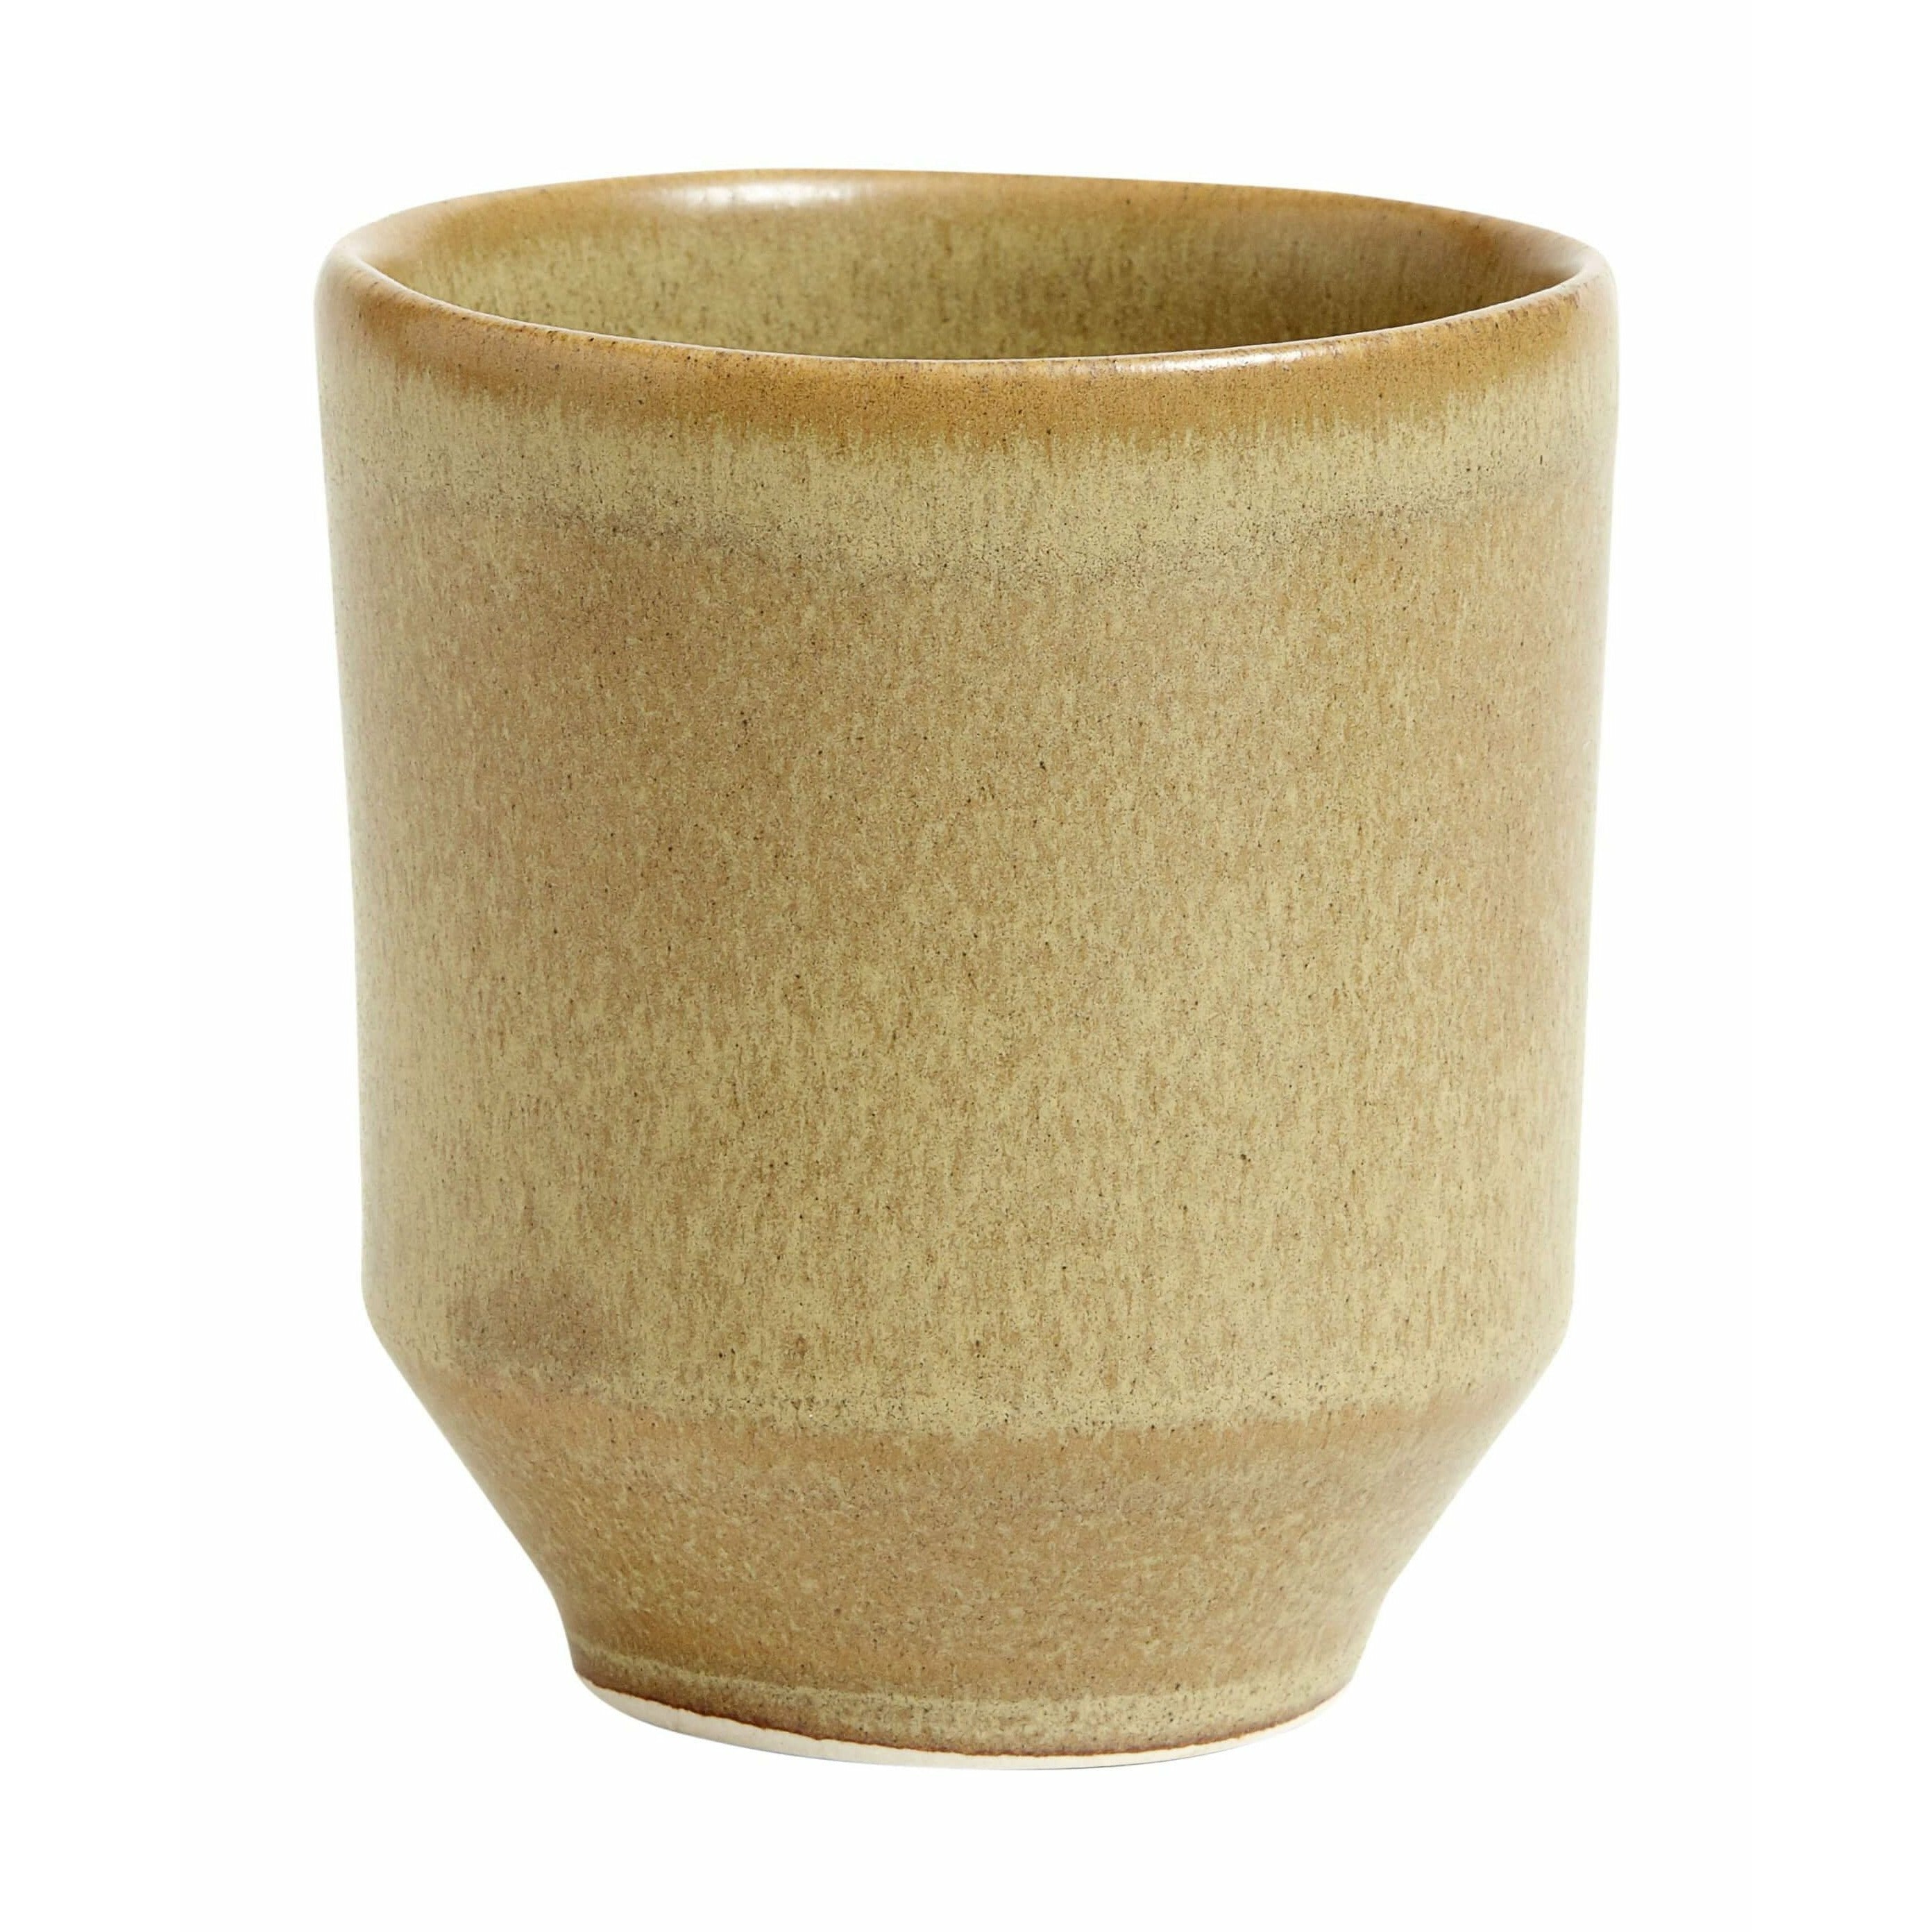 Muubs Ceto Cup Mustard, 8,5 cm